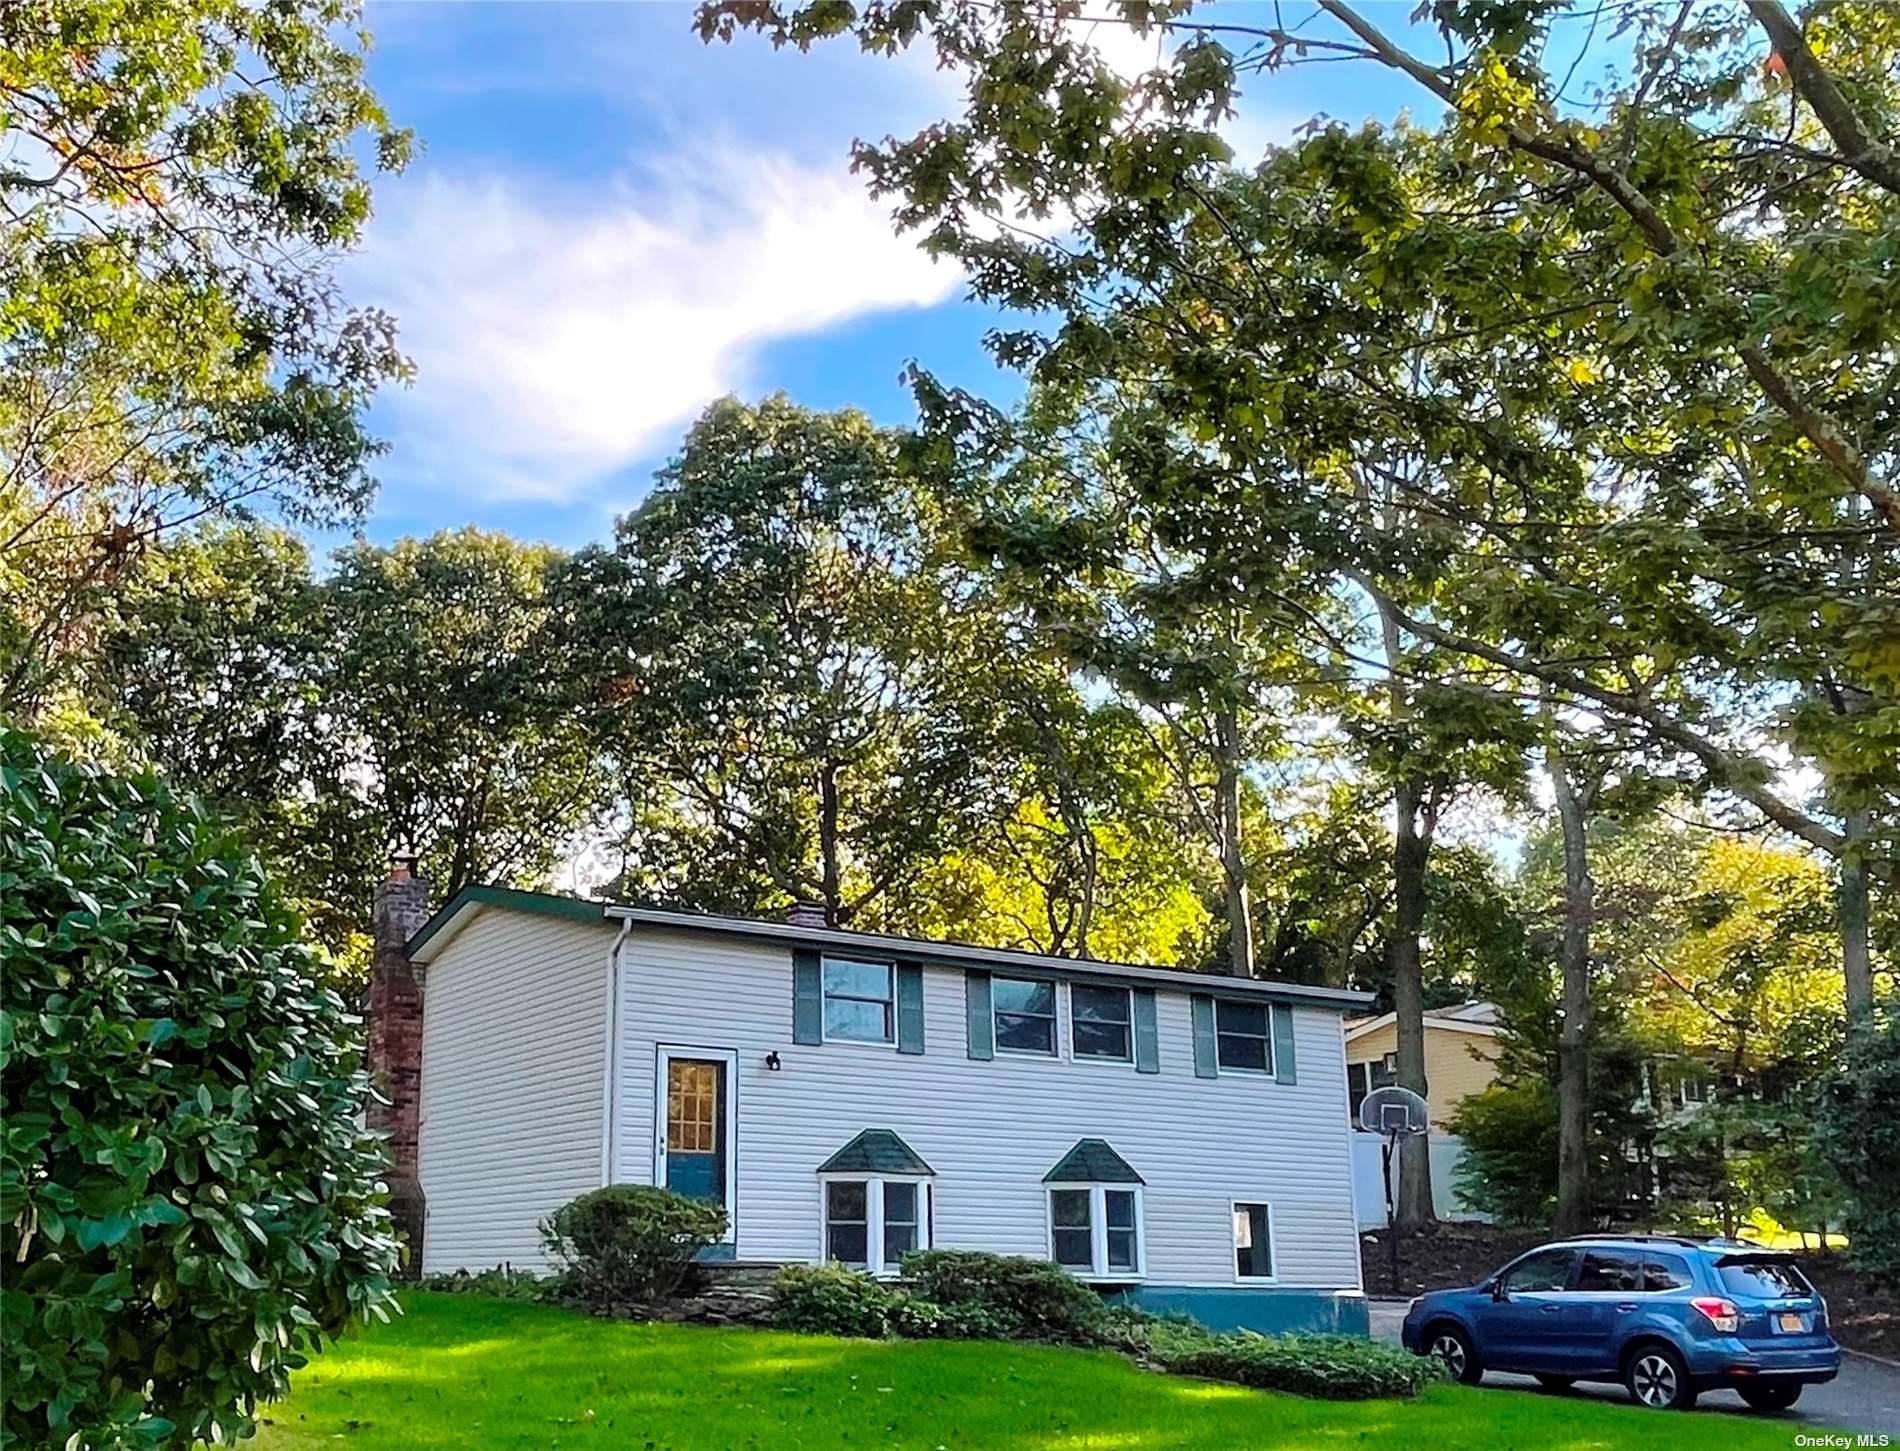 This newly renovated hi ranch home sits on a tree lined street in highly desirable in Three Village.